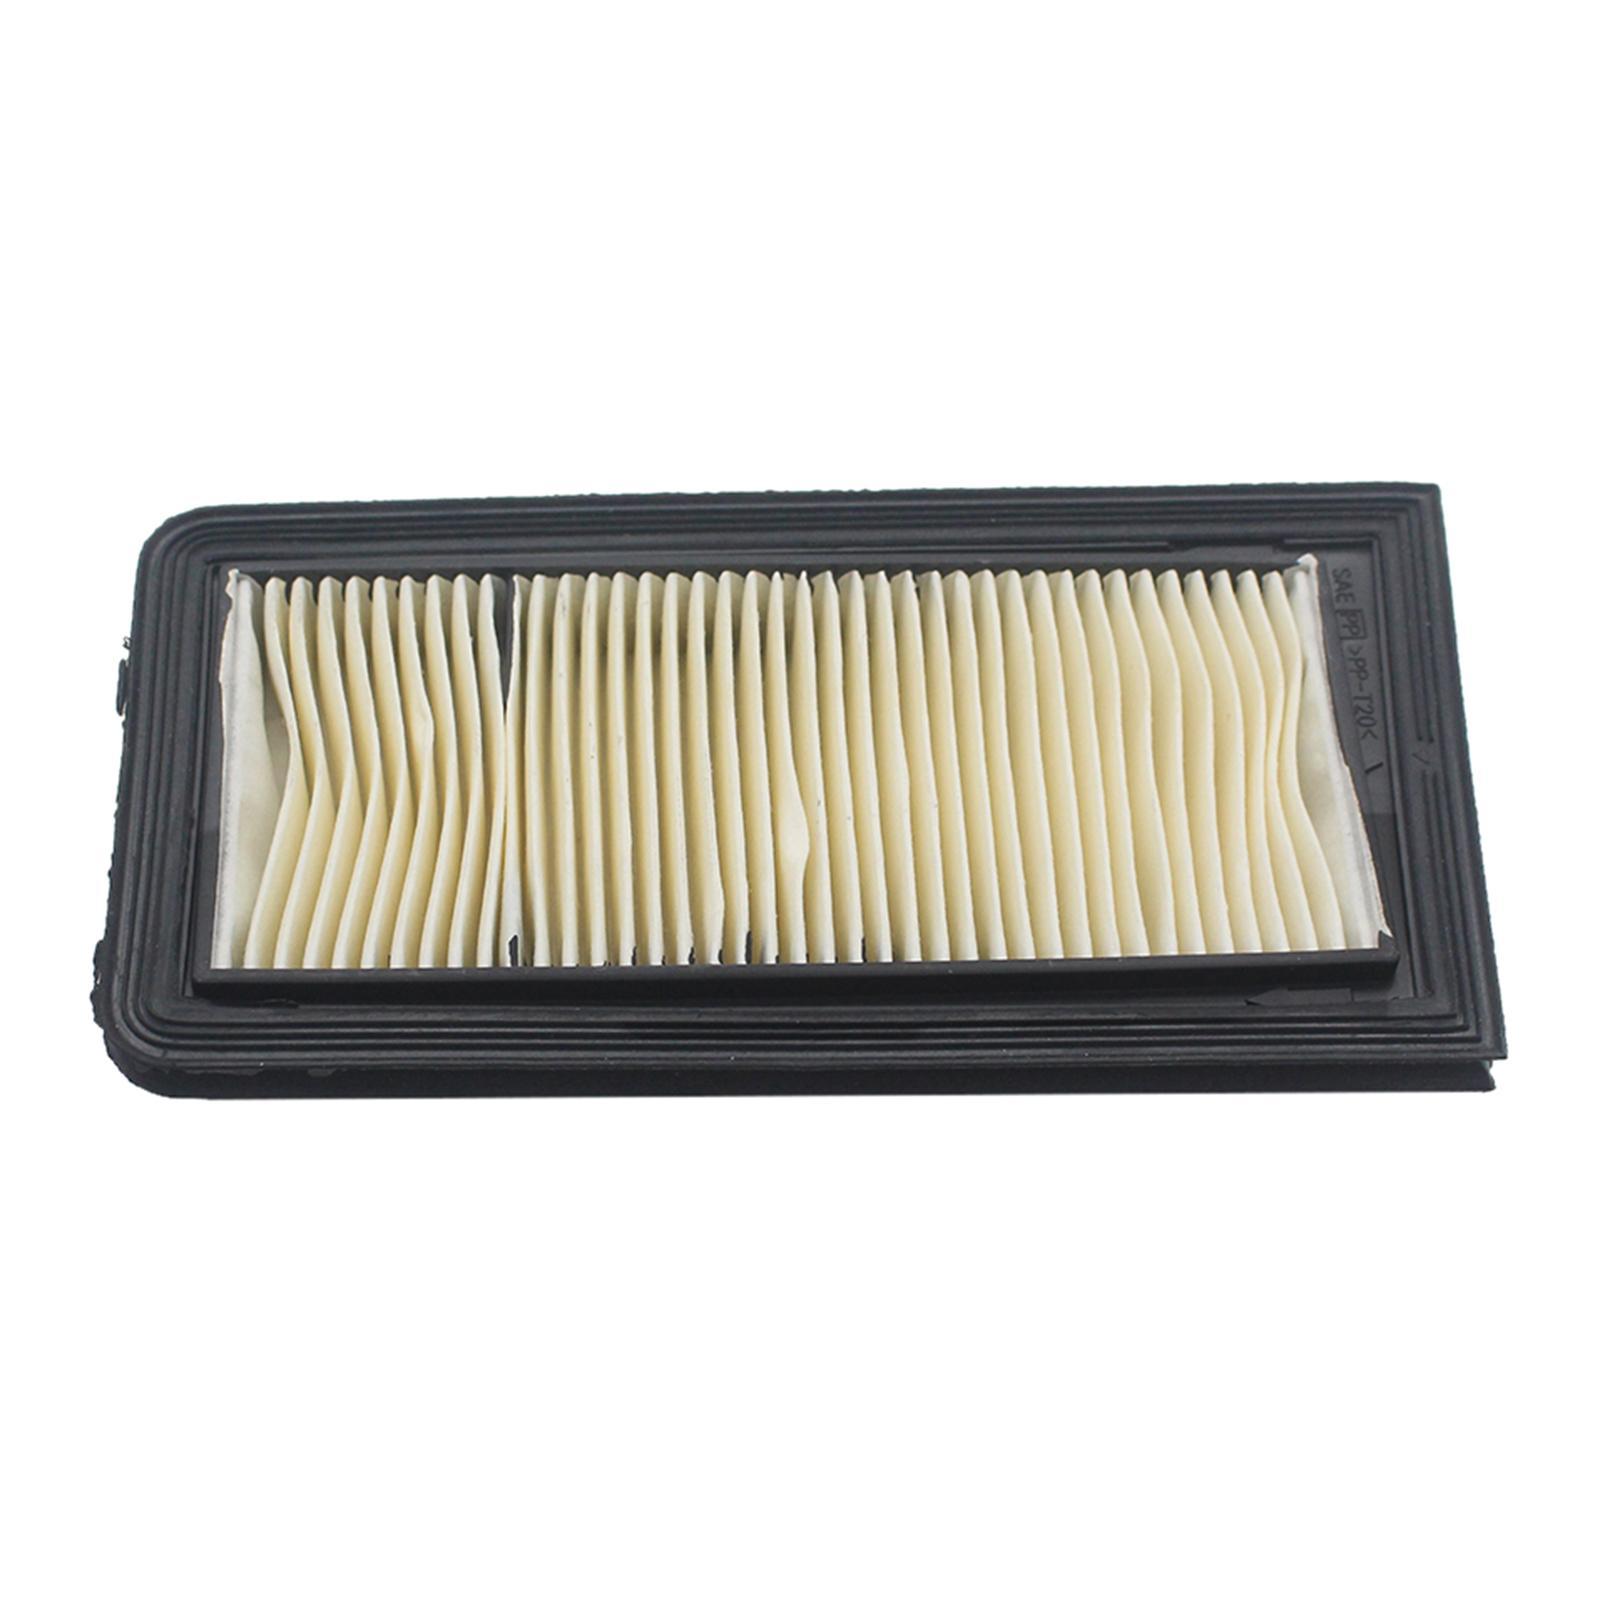 NEW Motorcycle Air Filter Fits for for Suzuki AN650 SKYWAVE   650 Sky wave650